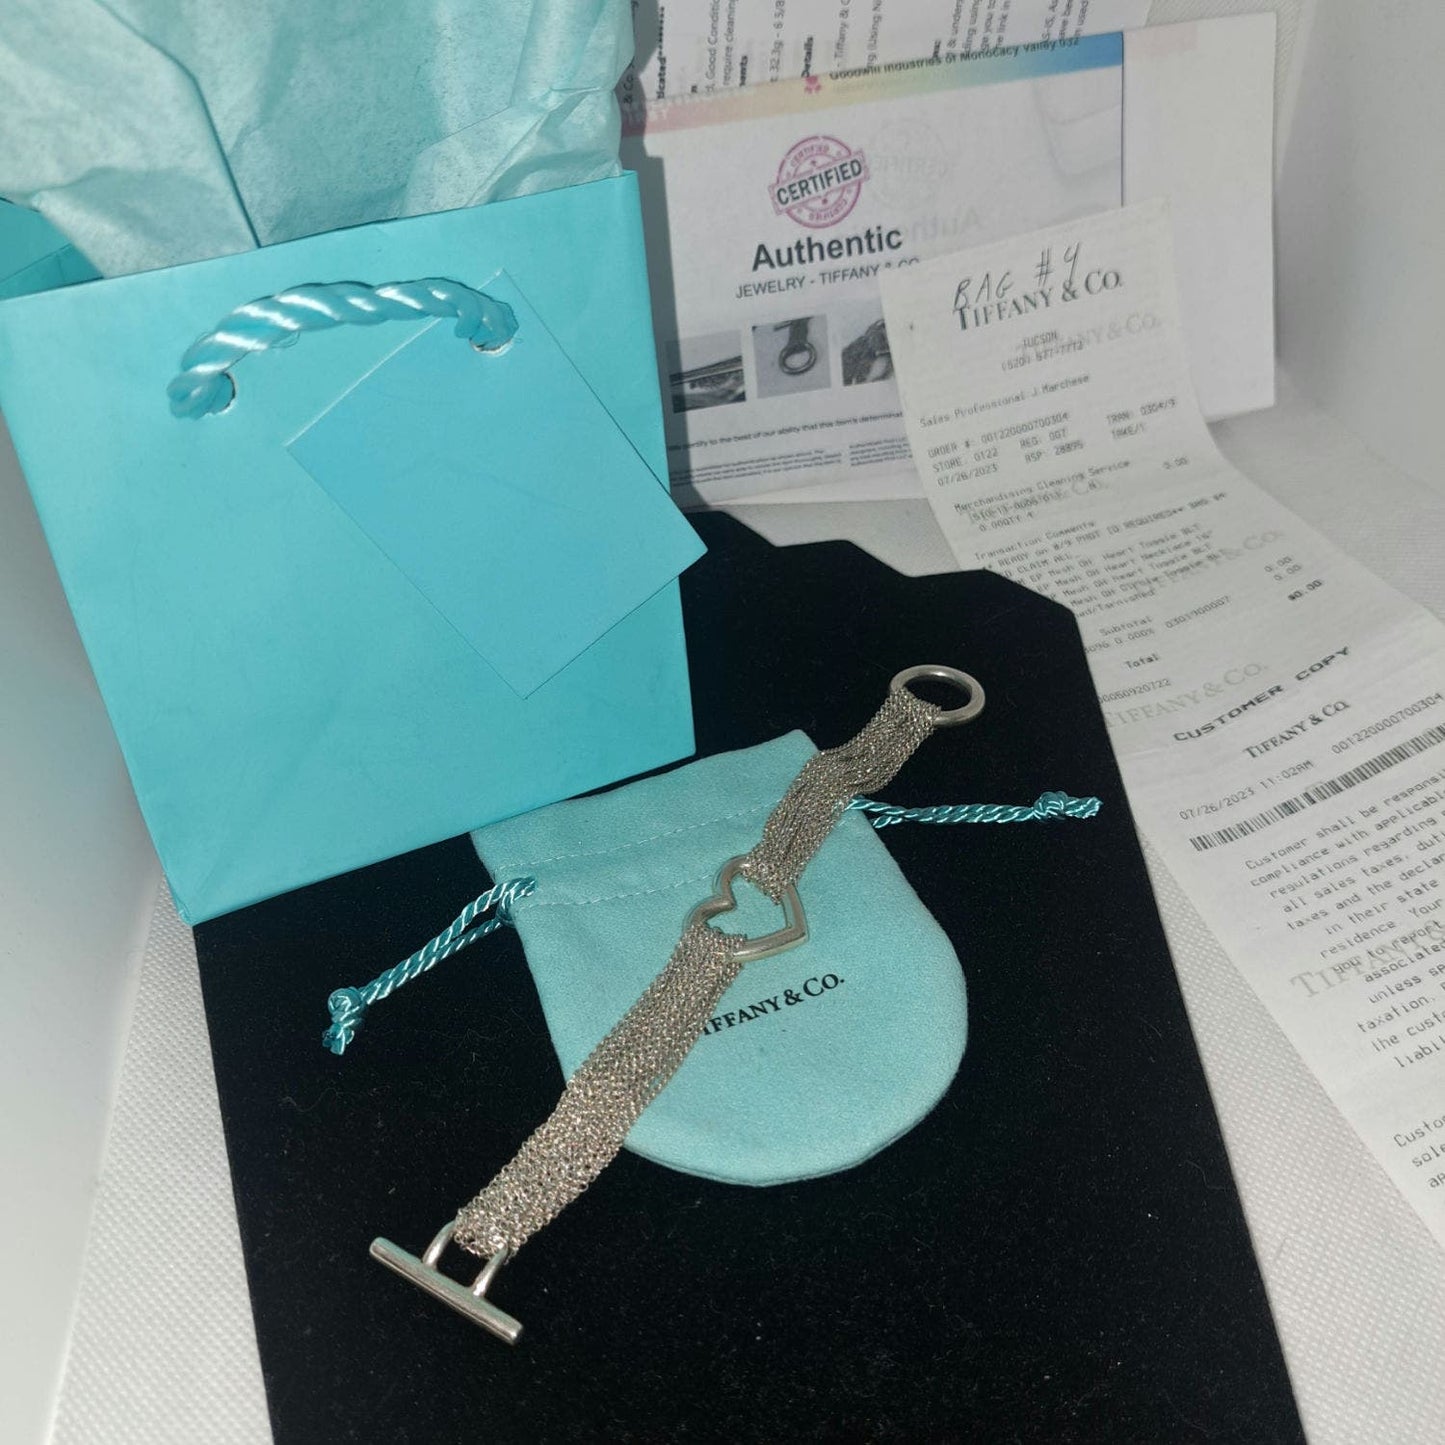 Your Valentine will LOVE this Authentic Mesh Heart Tiffany & Co Bracelet with gift bag